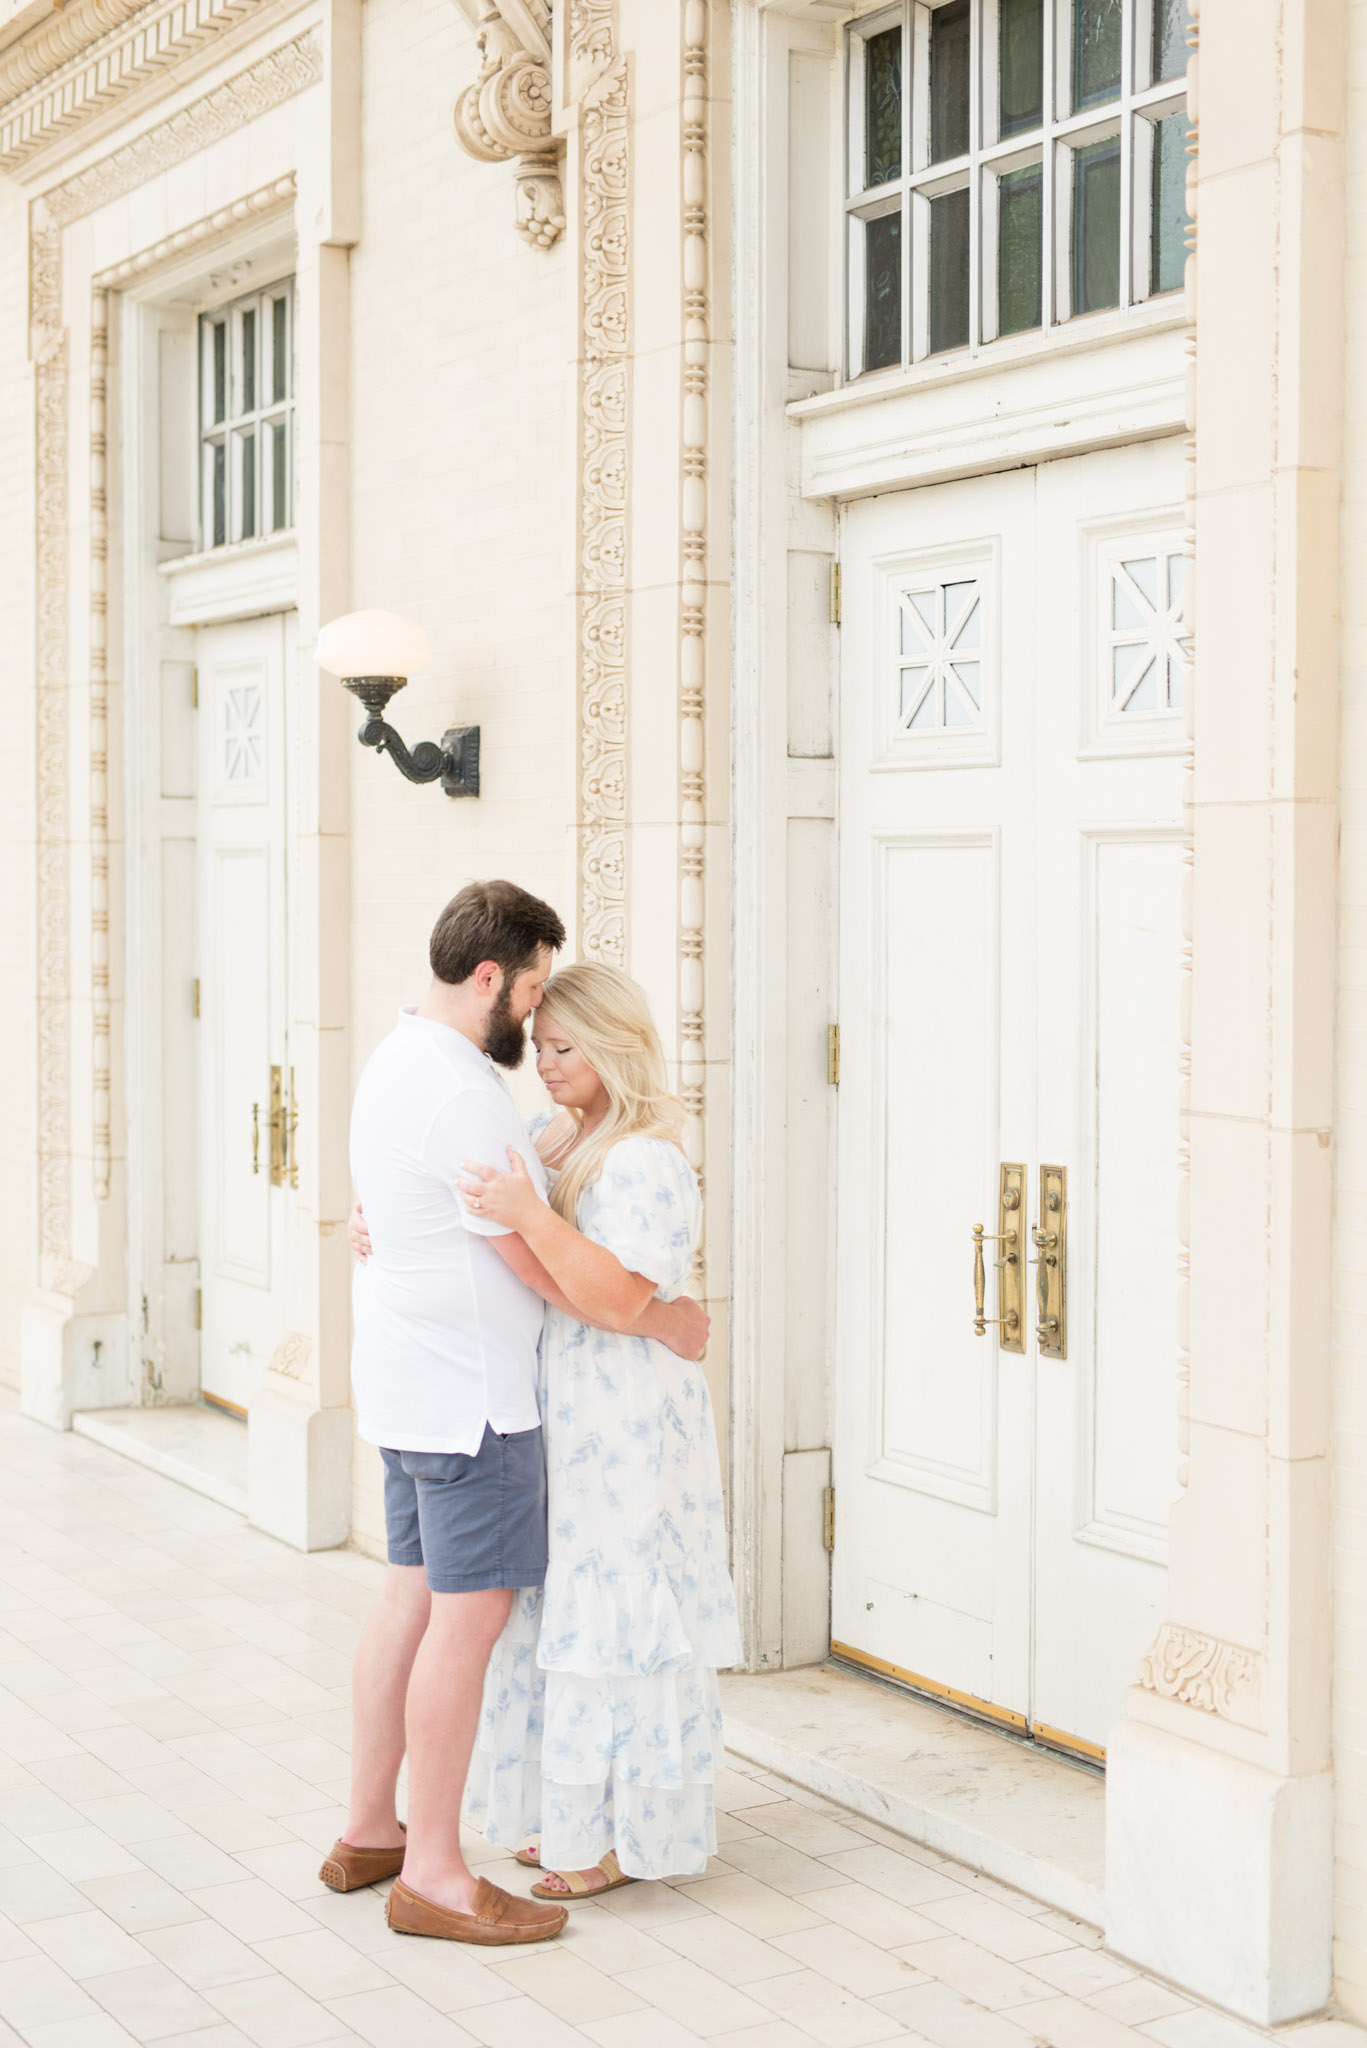 Husband and wife snuggle by large white doors.